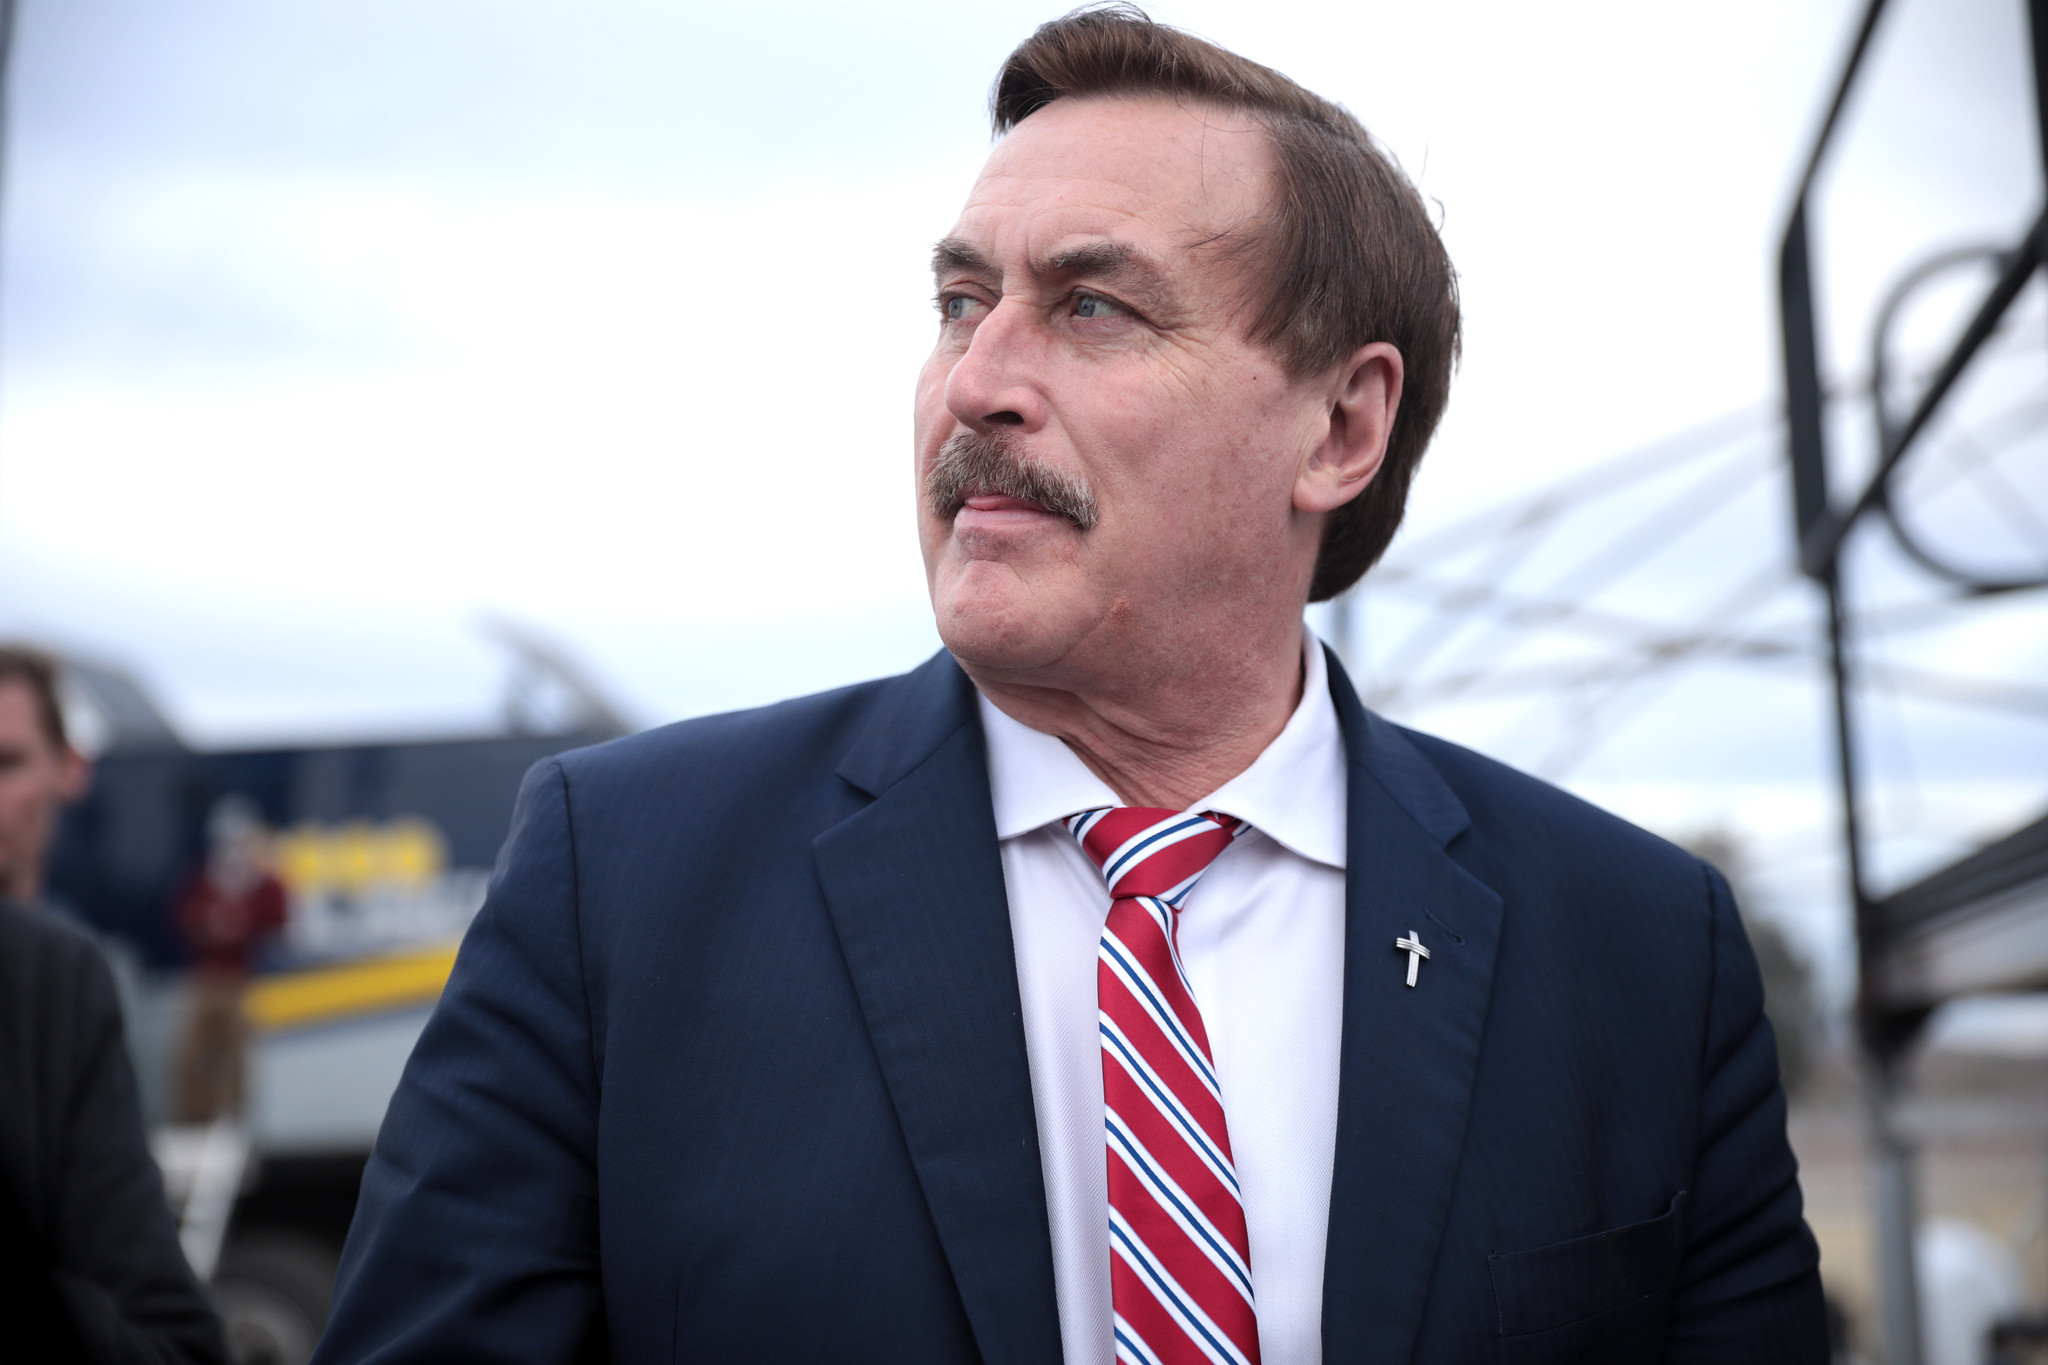 Mike Lindell, by Gage Skidmore, is licensed under a Creative Commons Attribution/Share-alike 2.0 Generic License.